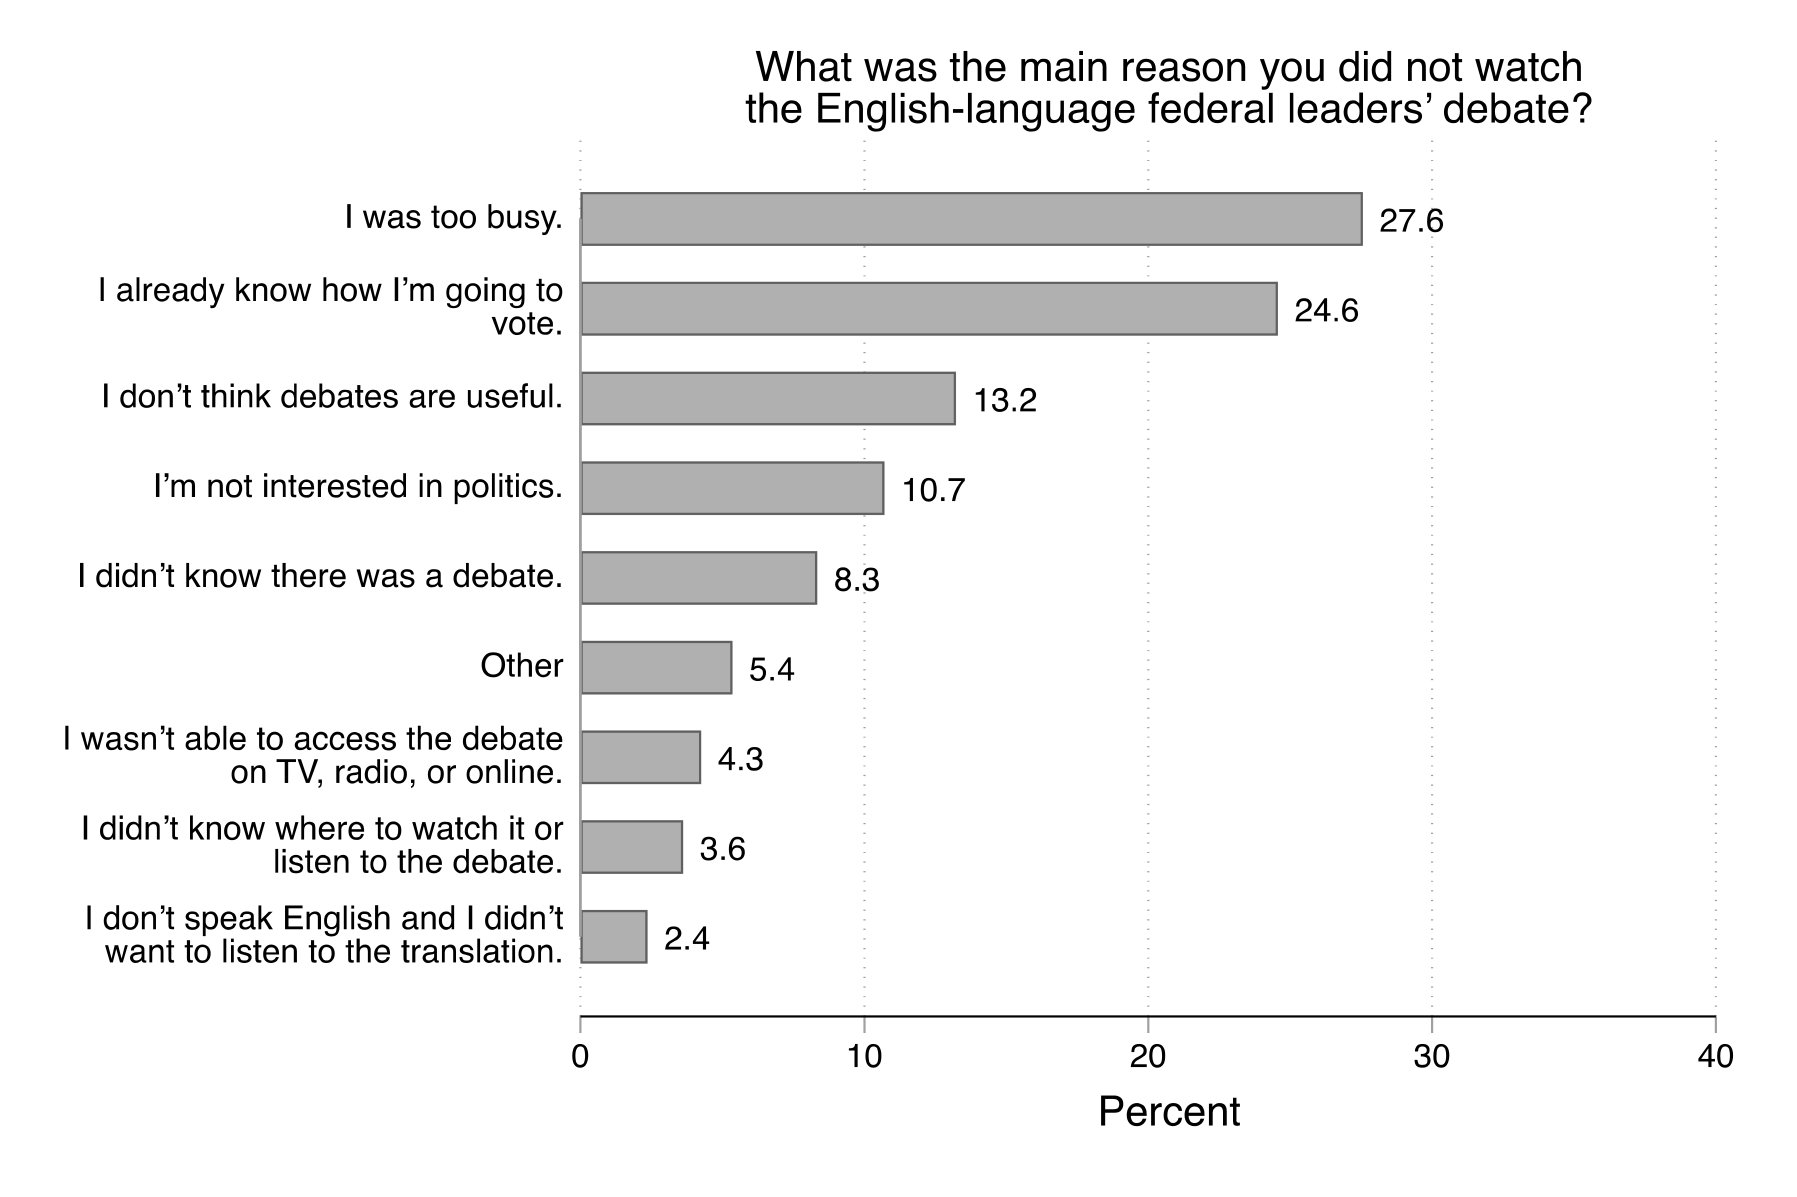 Figure 12. This figure shows the main reasons given by those who did not watch the English debate.  The most common reason given (28%) was I was too busy. Other common reasons given were: I already know how I'm going to vote (25%) and I don't think debates are useful (13%).